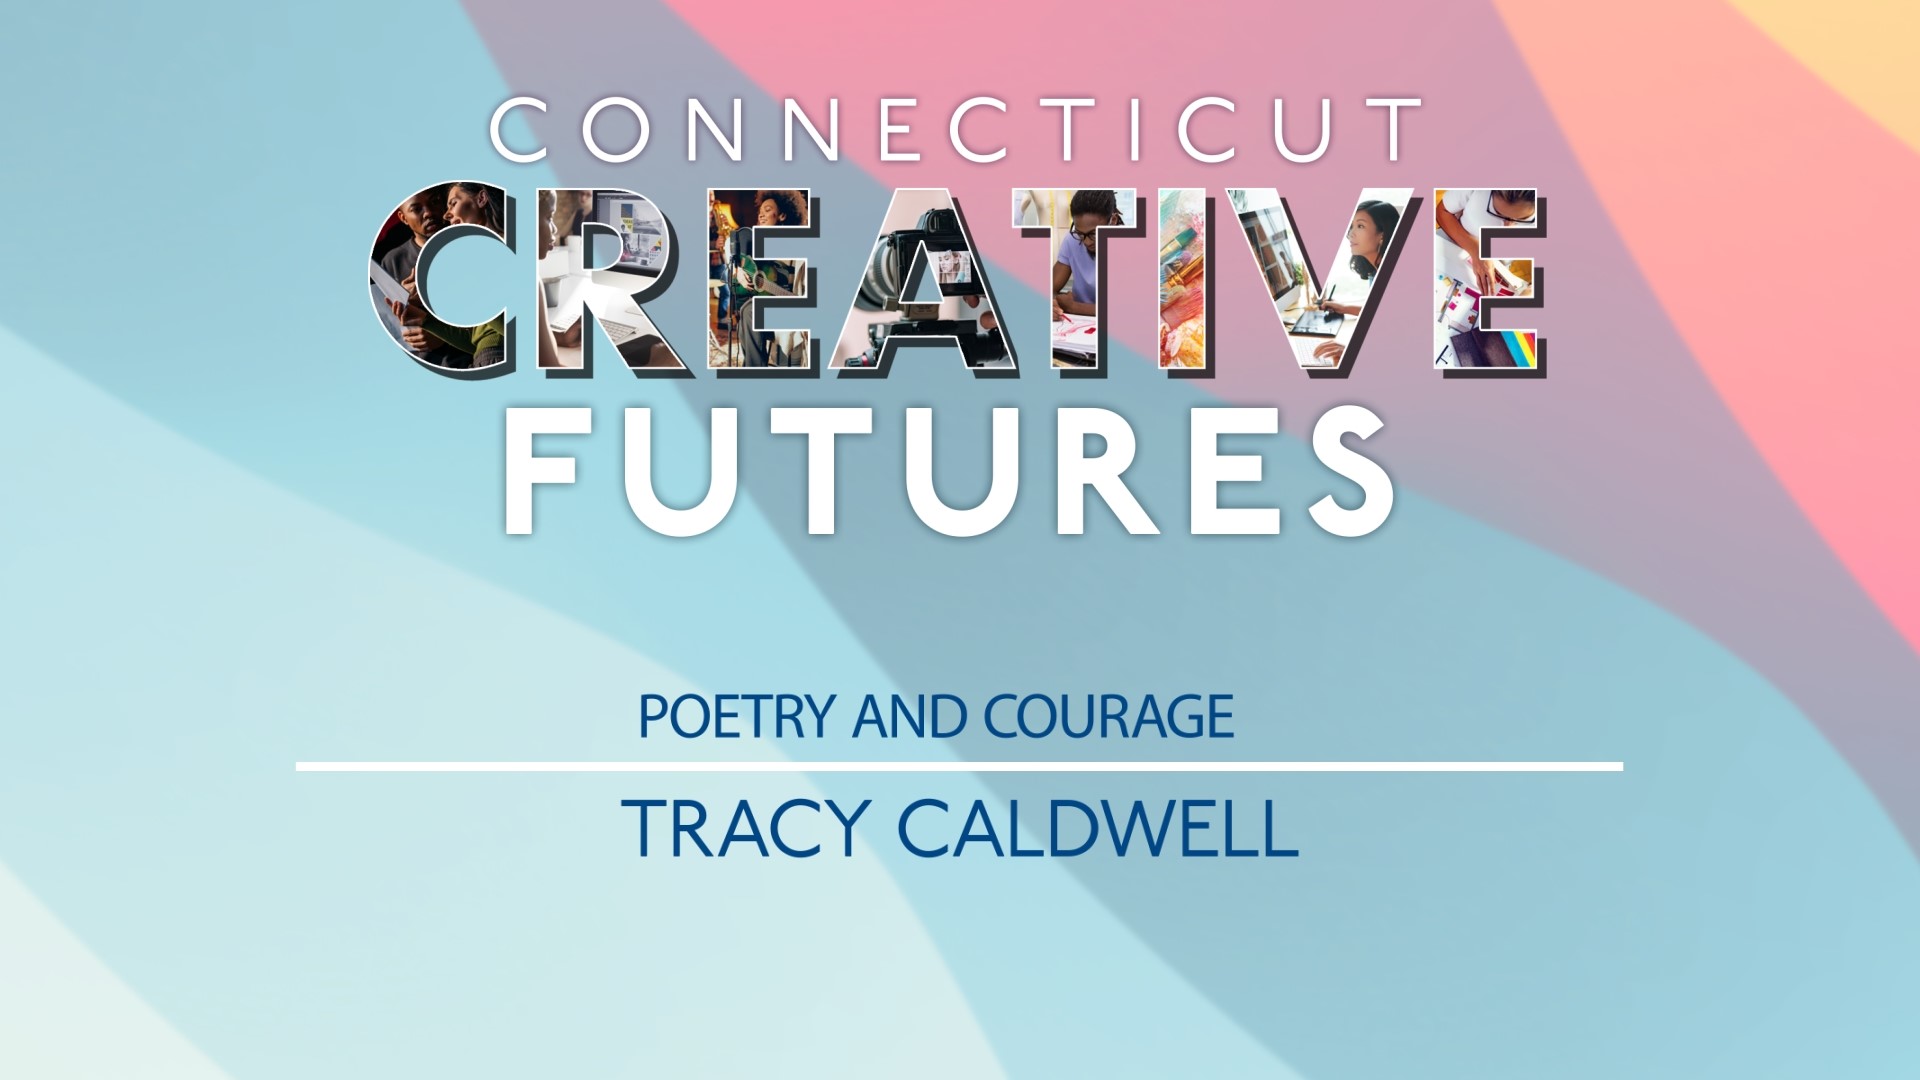 Tracy Caldwell explains how poetry has made her more courageous.